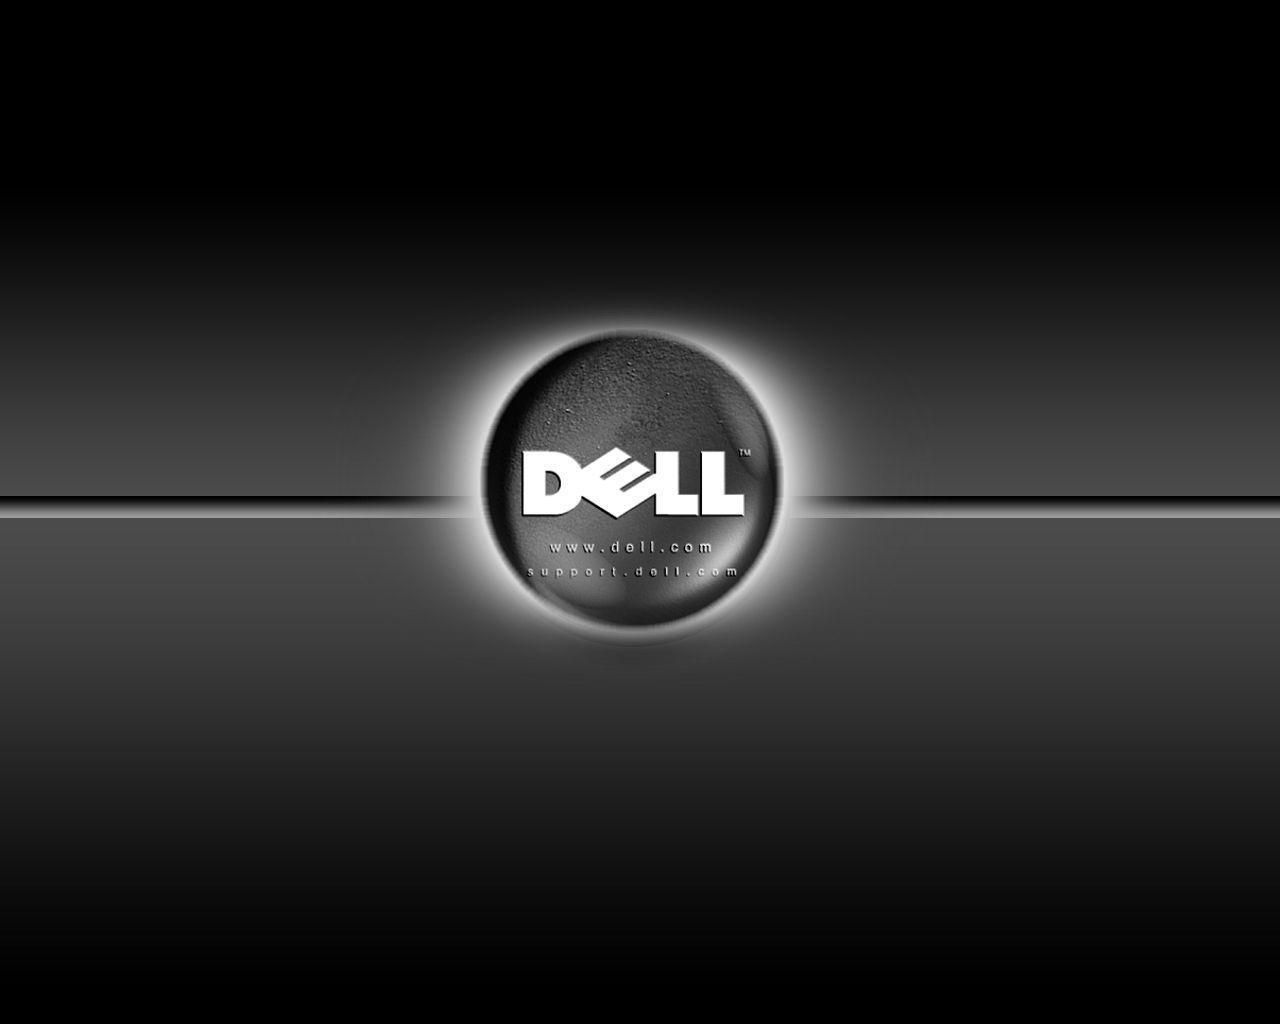 Download wallpapers Dell logo, blue metal background, creative, Dell,  brands, Dell 3D logo, artwork, Dell metal logo for desktop with resolution  2560x1600. High Quality HD pictures wallpapers